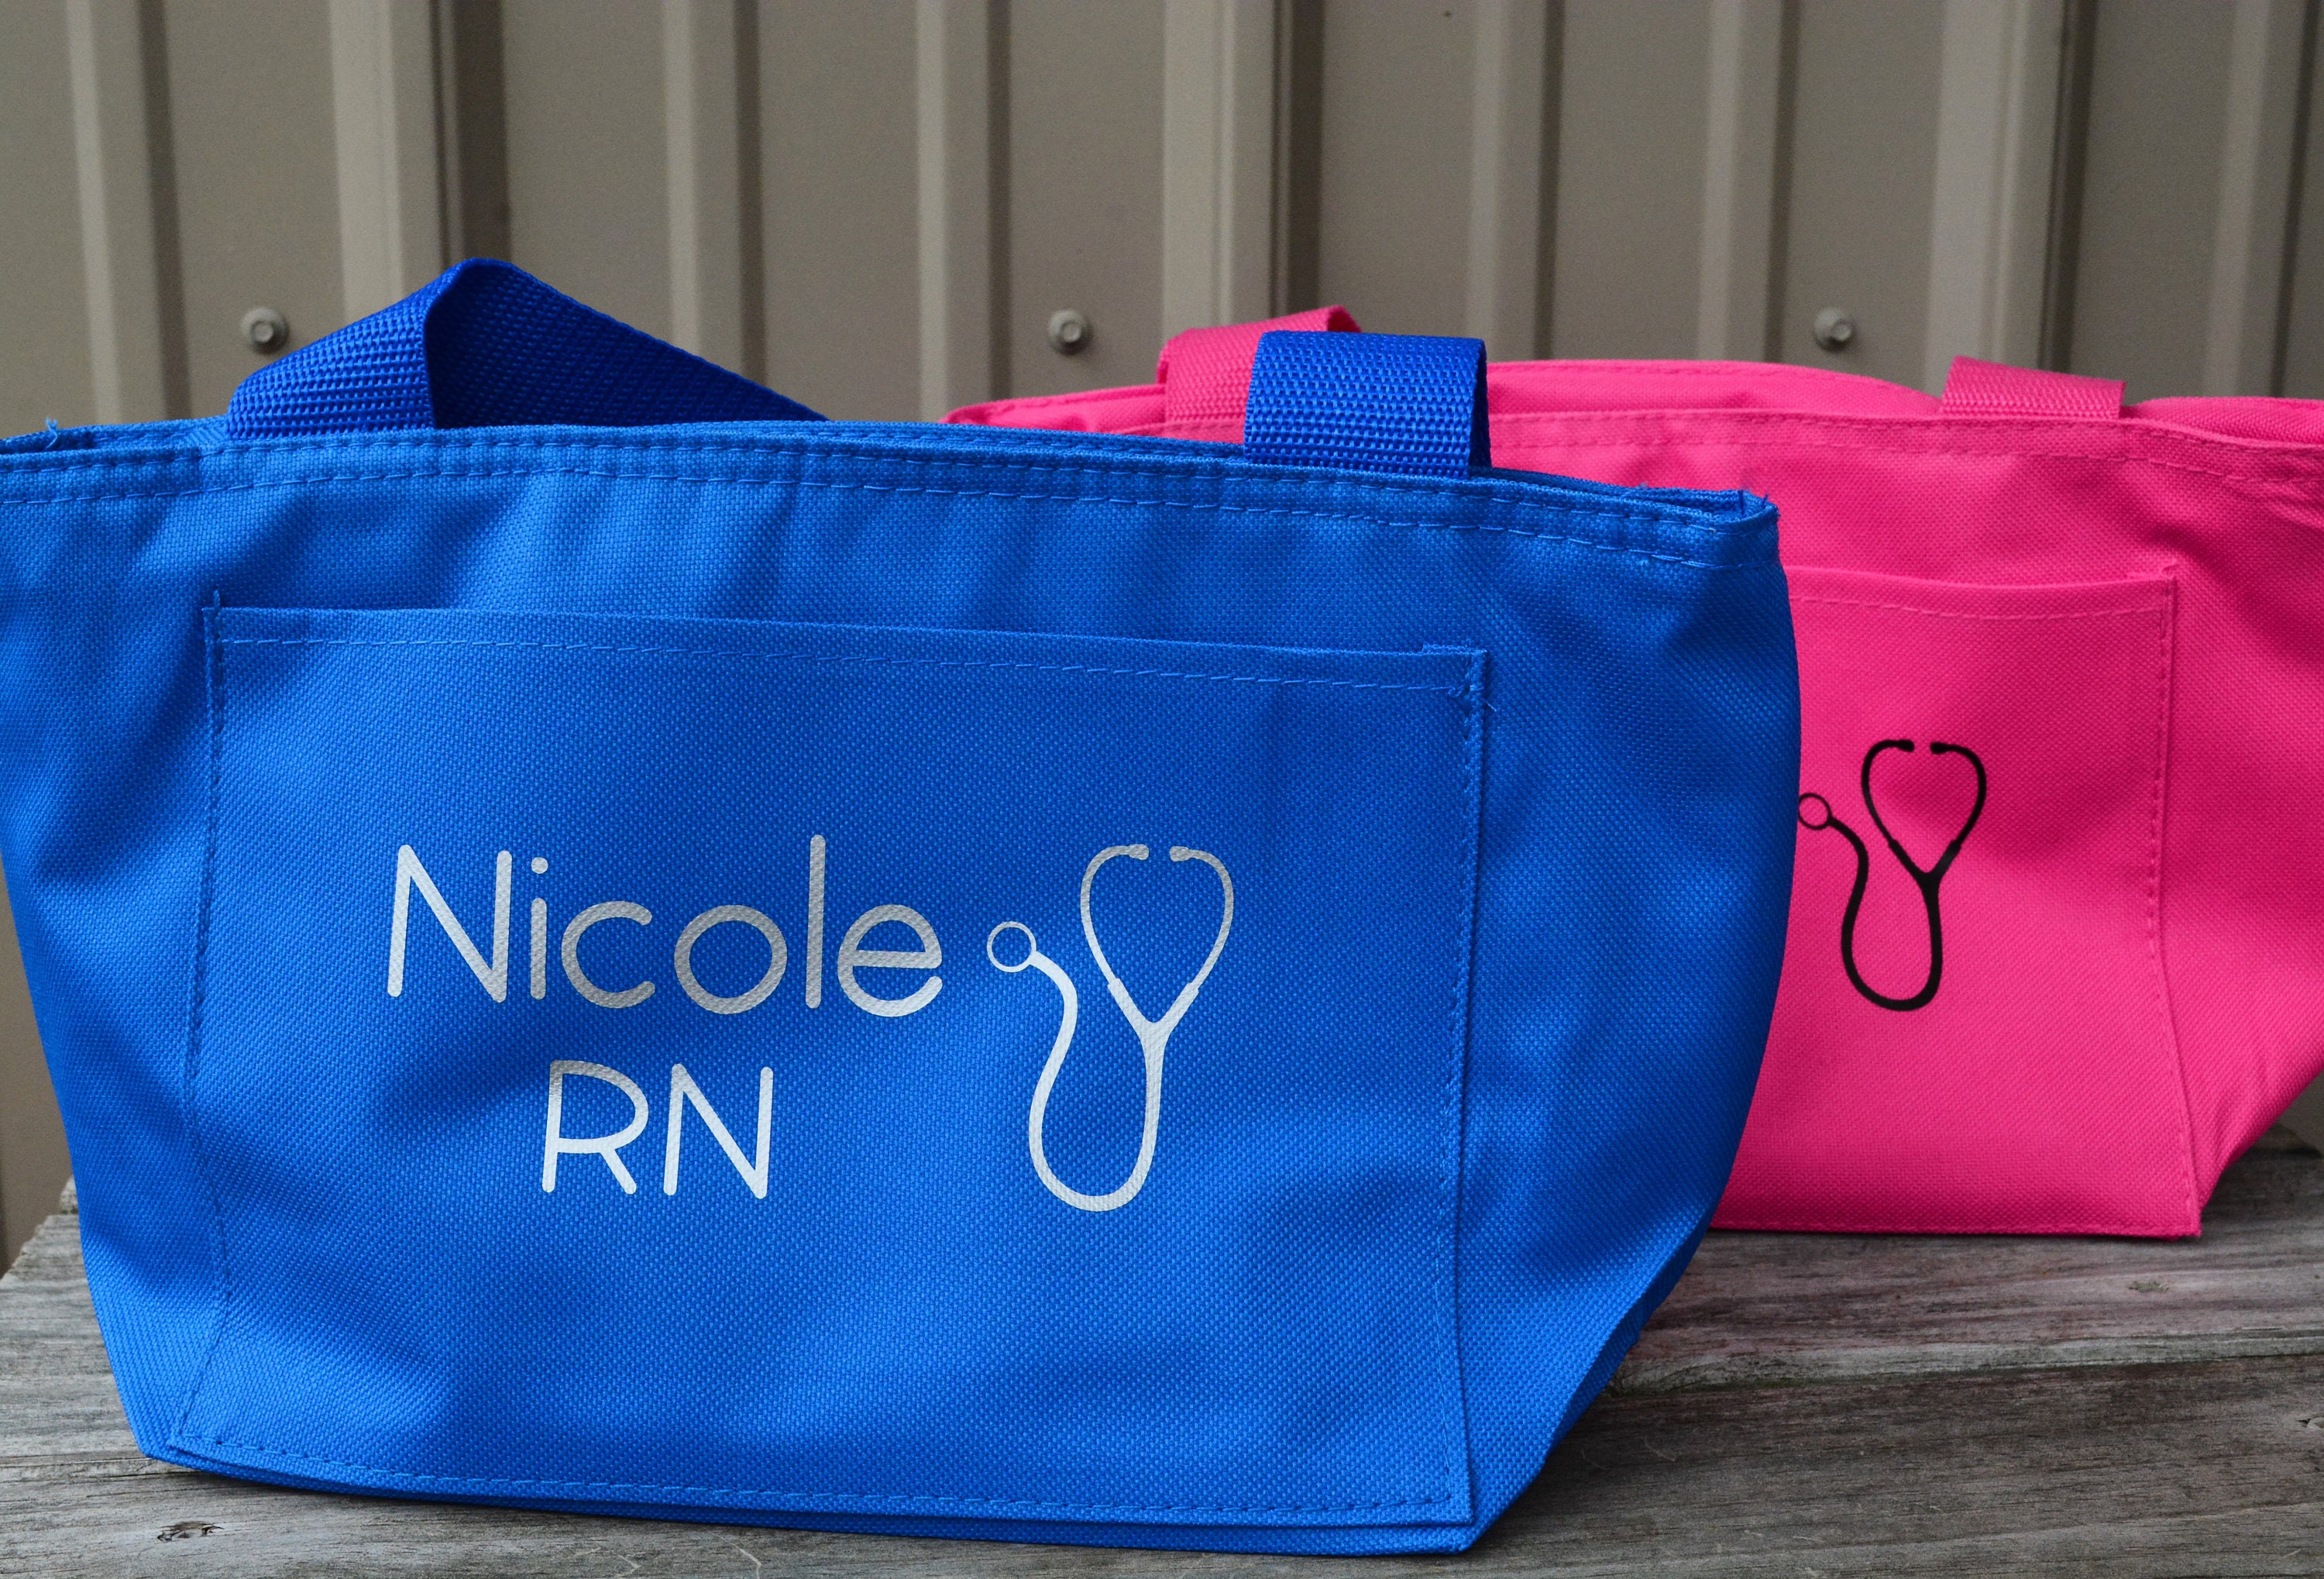 Personalized Lunch Bag Insulated Lunch Bag Nurse Lunch Bag 